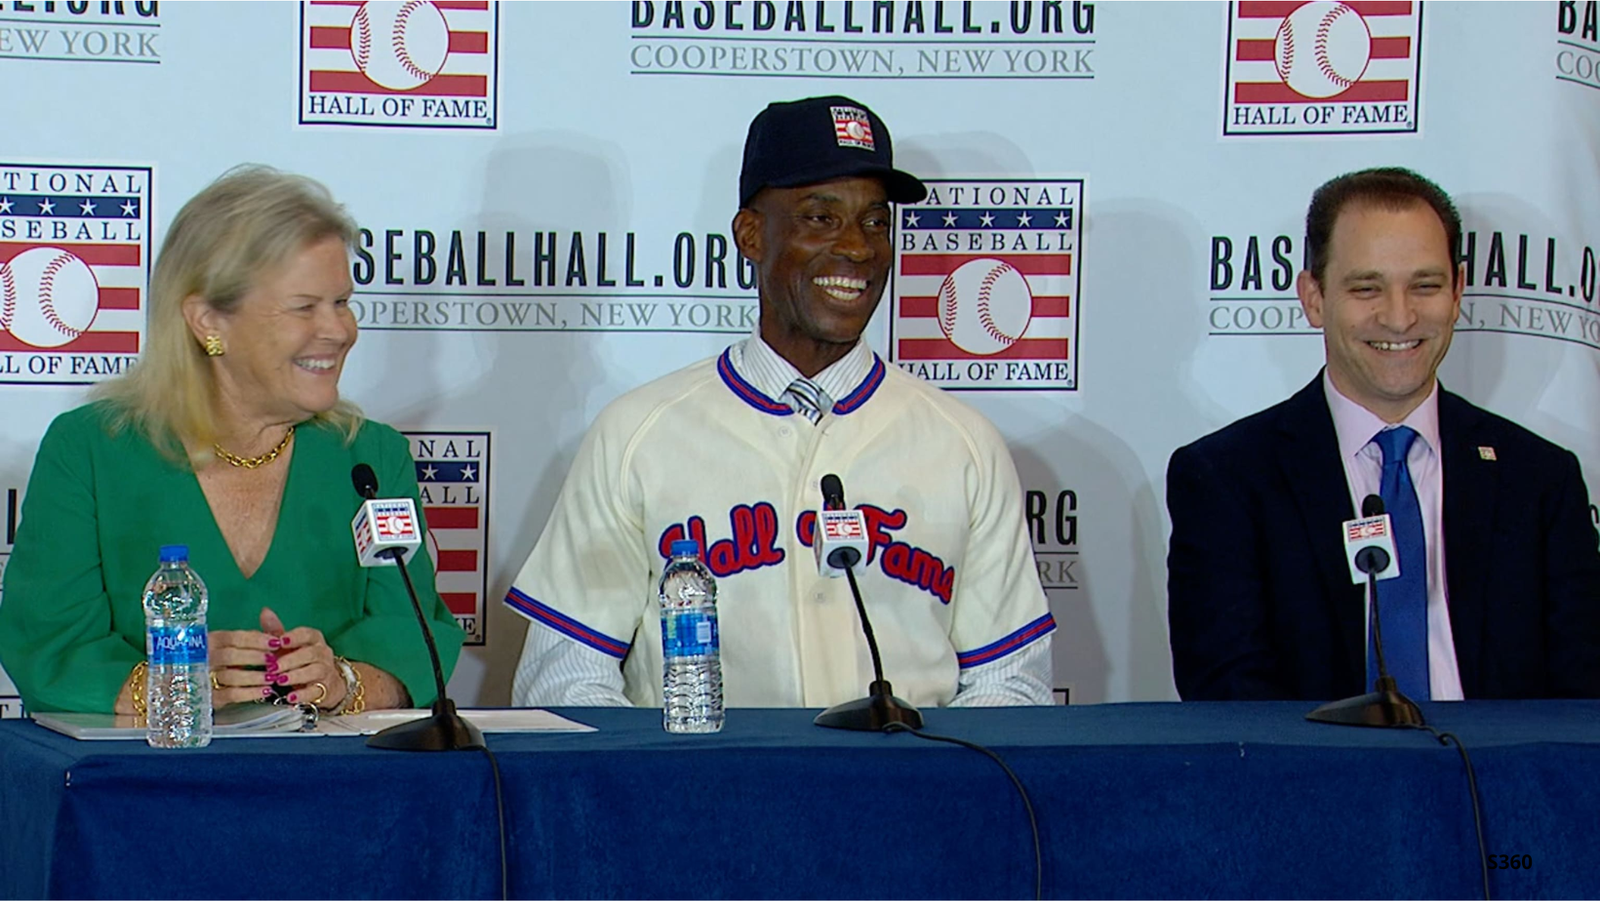 Photo of Fred McGriff along with Baseball of Fame Leaders